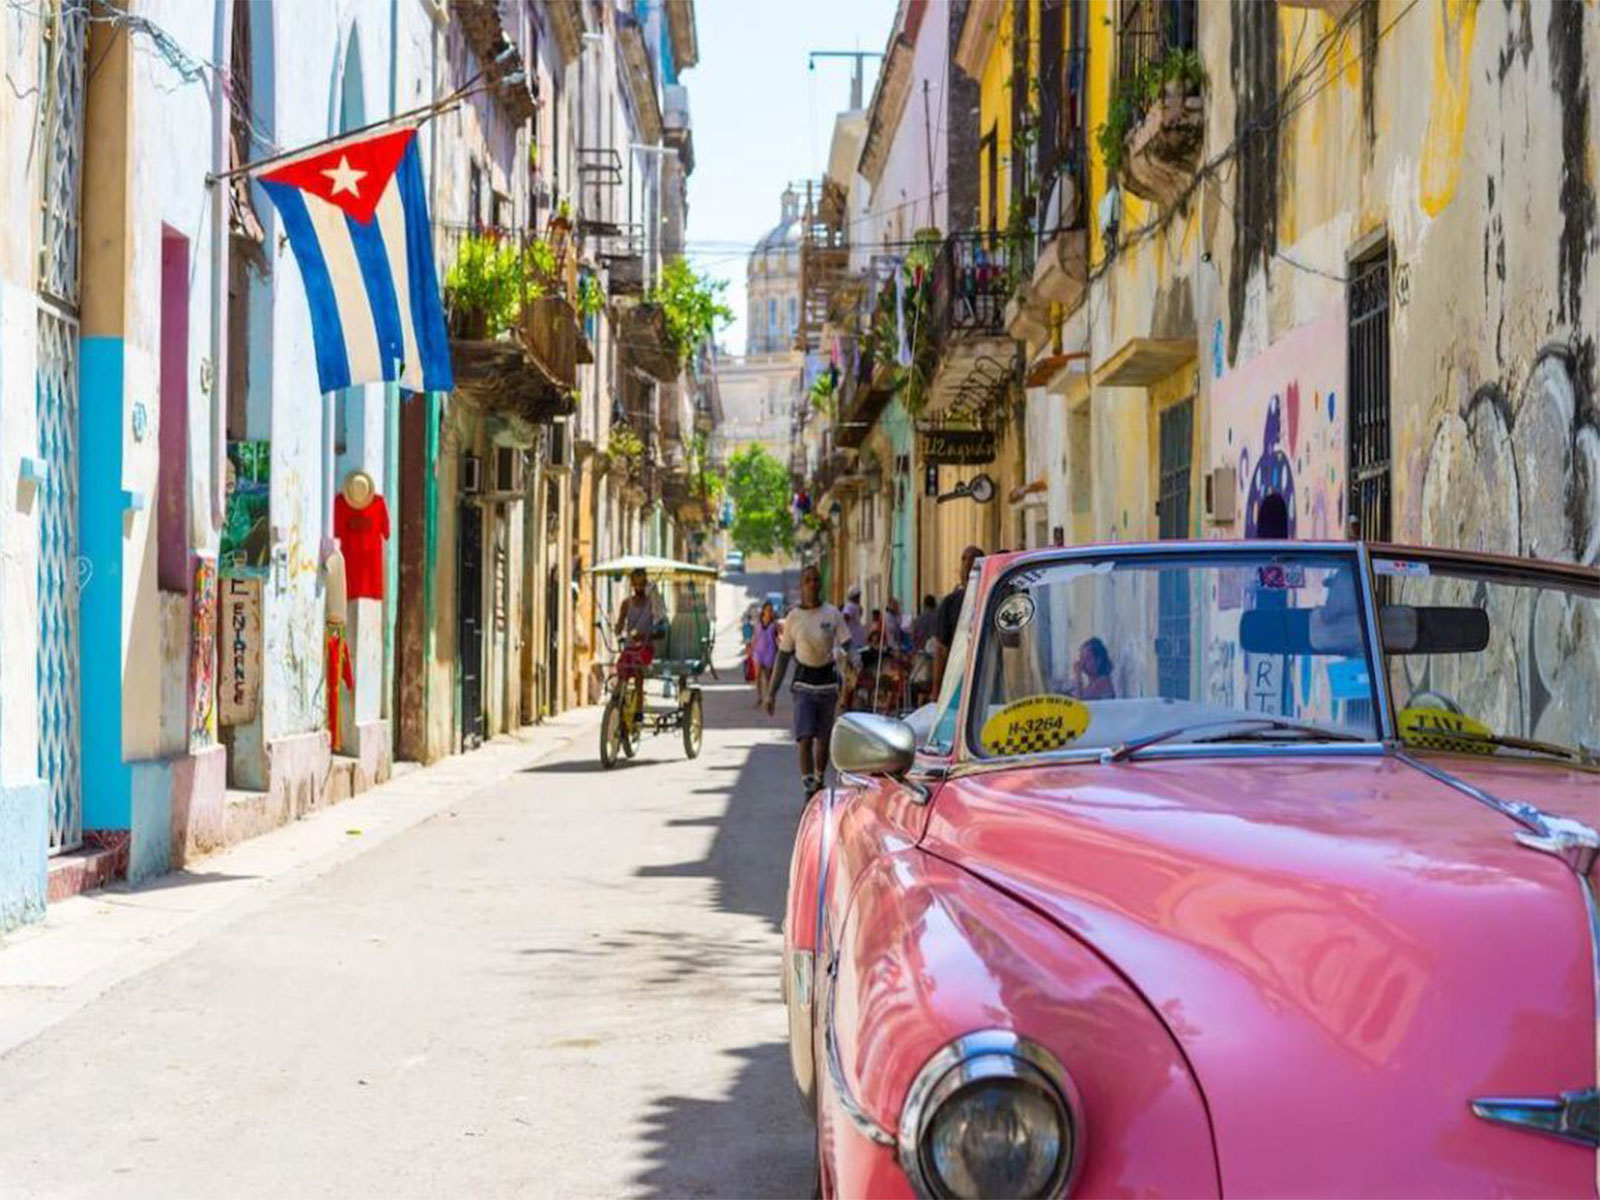 Day 2 - Havana: History, tradition, and Cuban music! (Walking Tour/Panoramic)